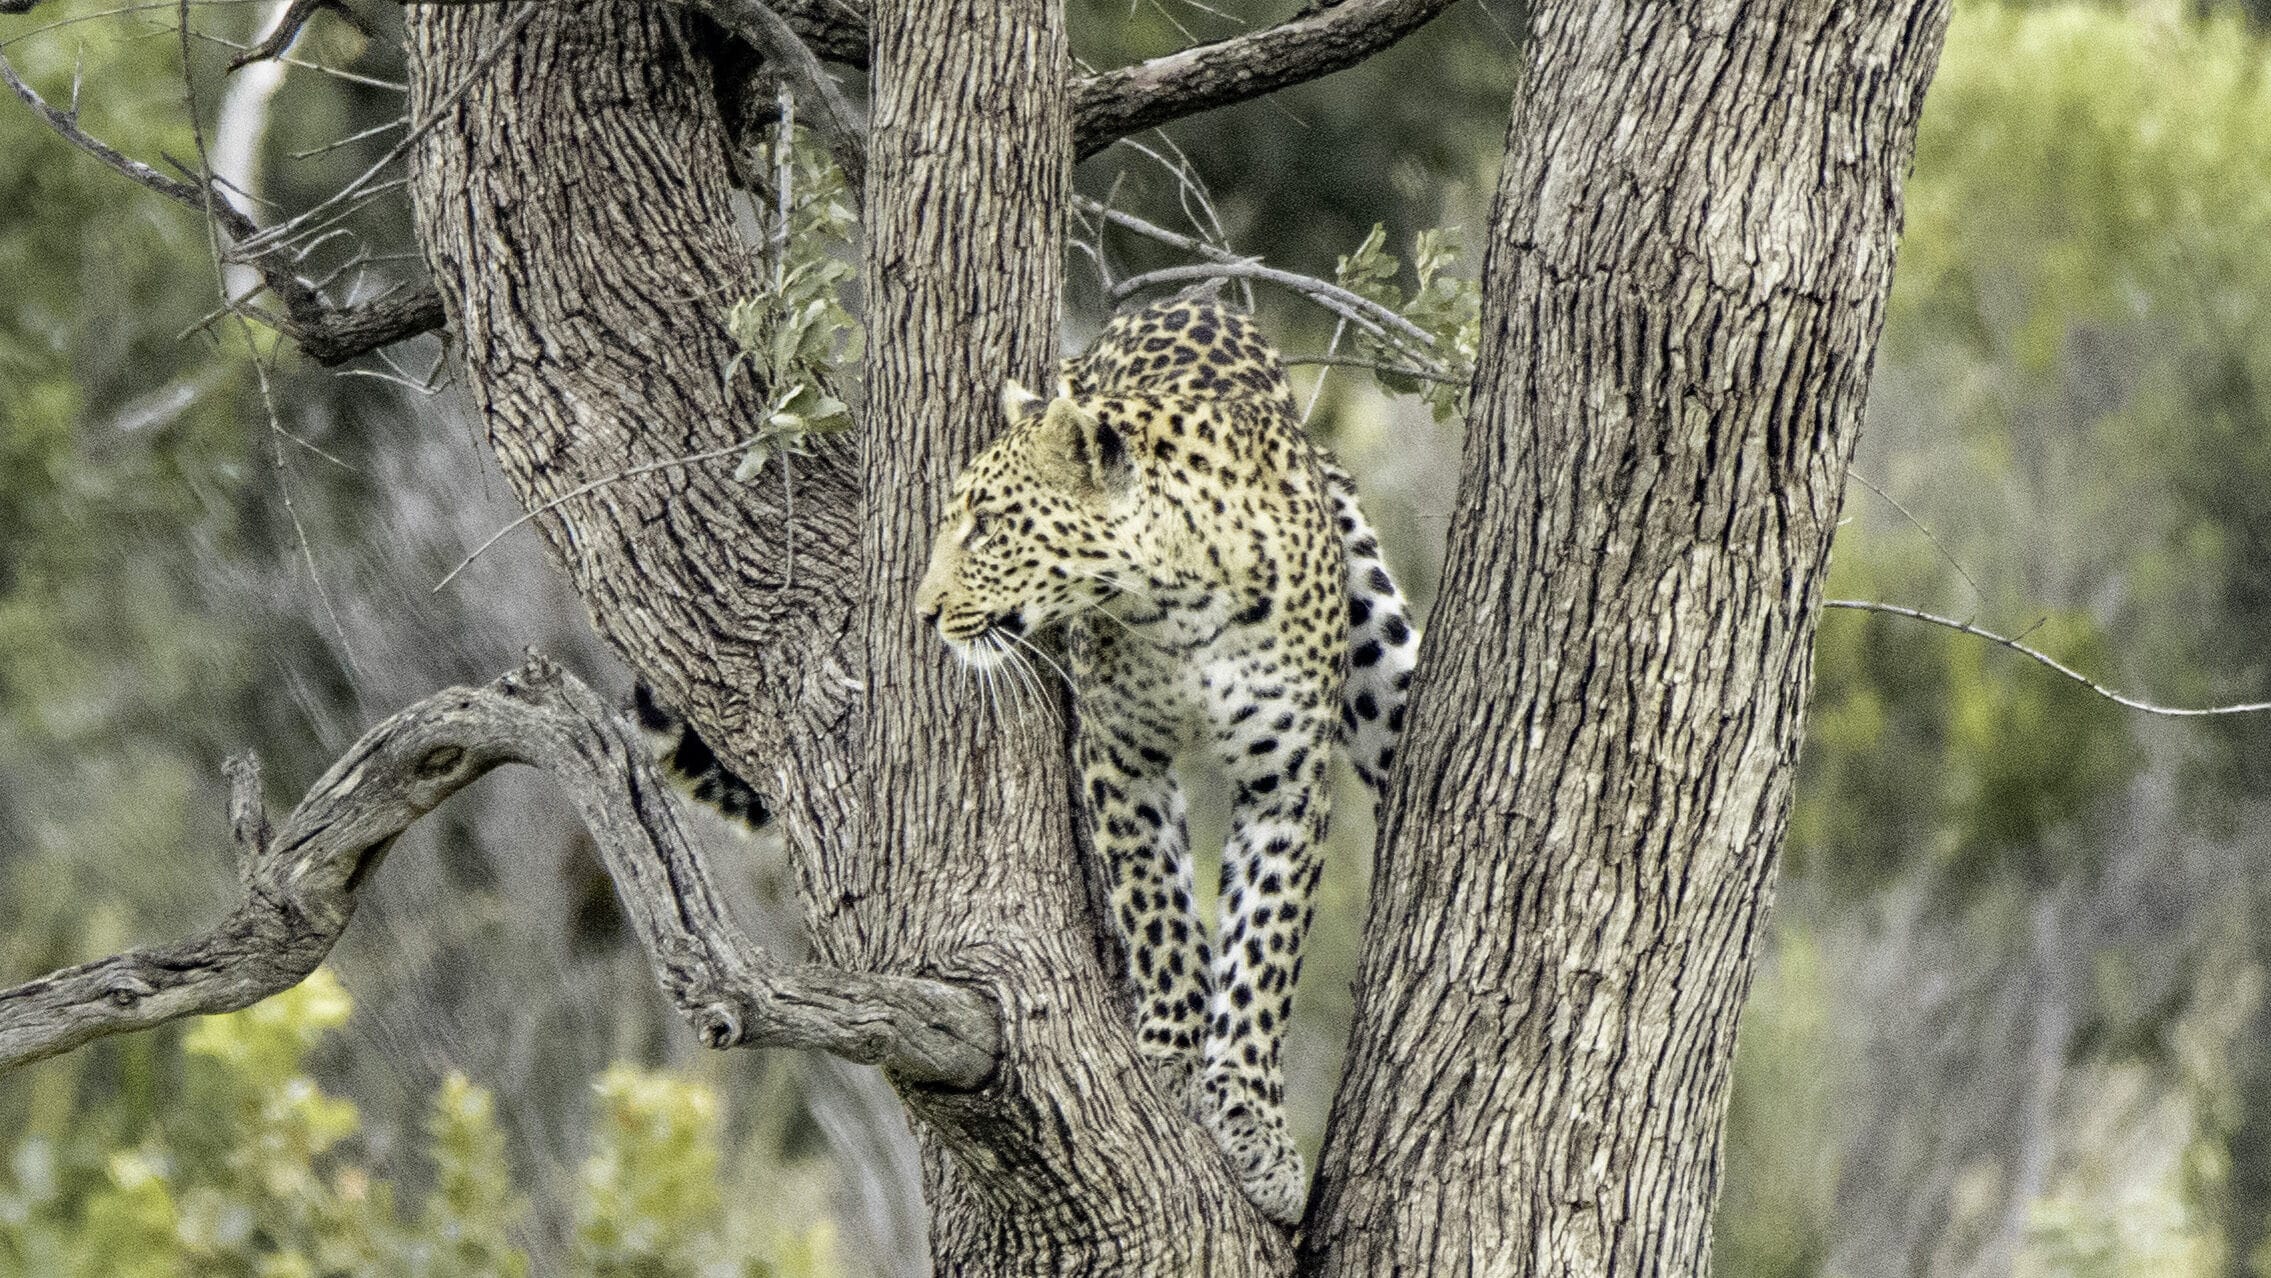 Leopard checking surroundings